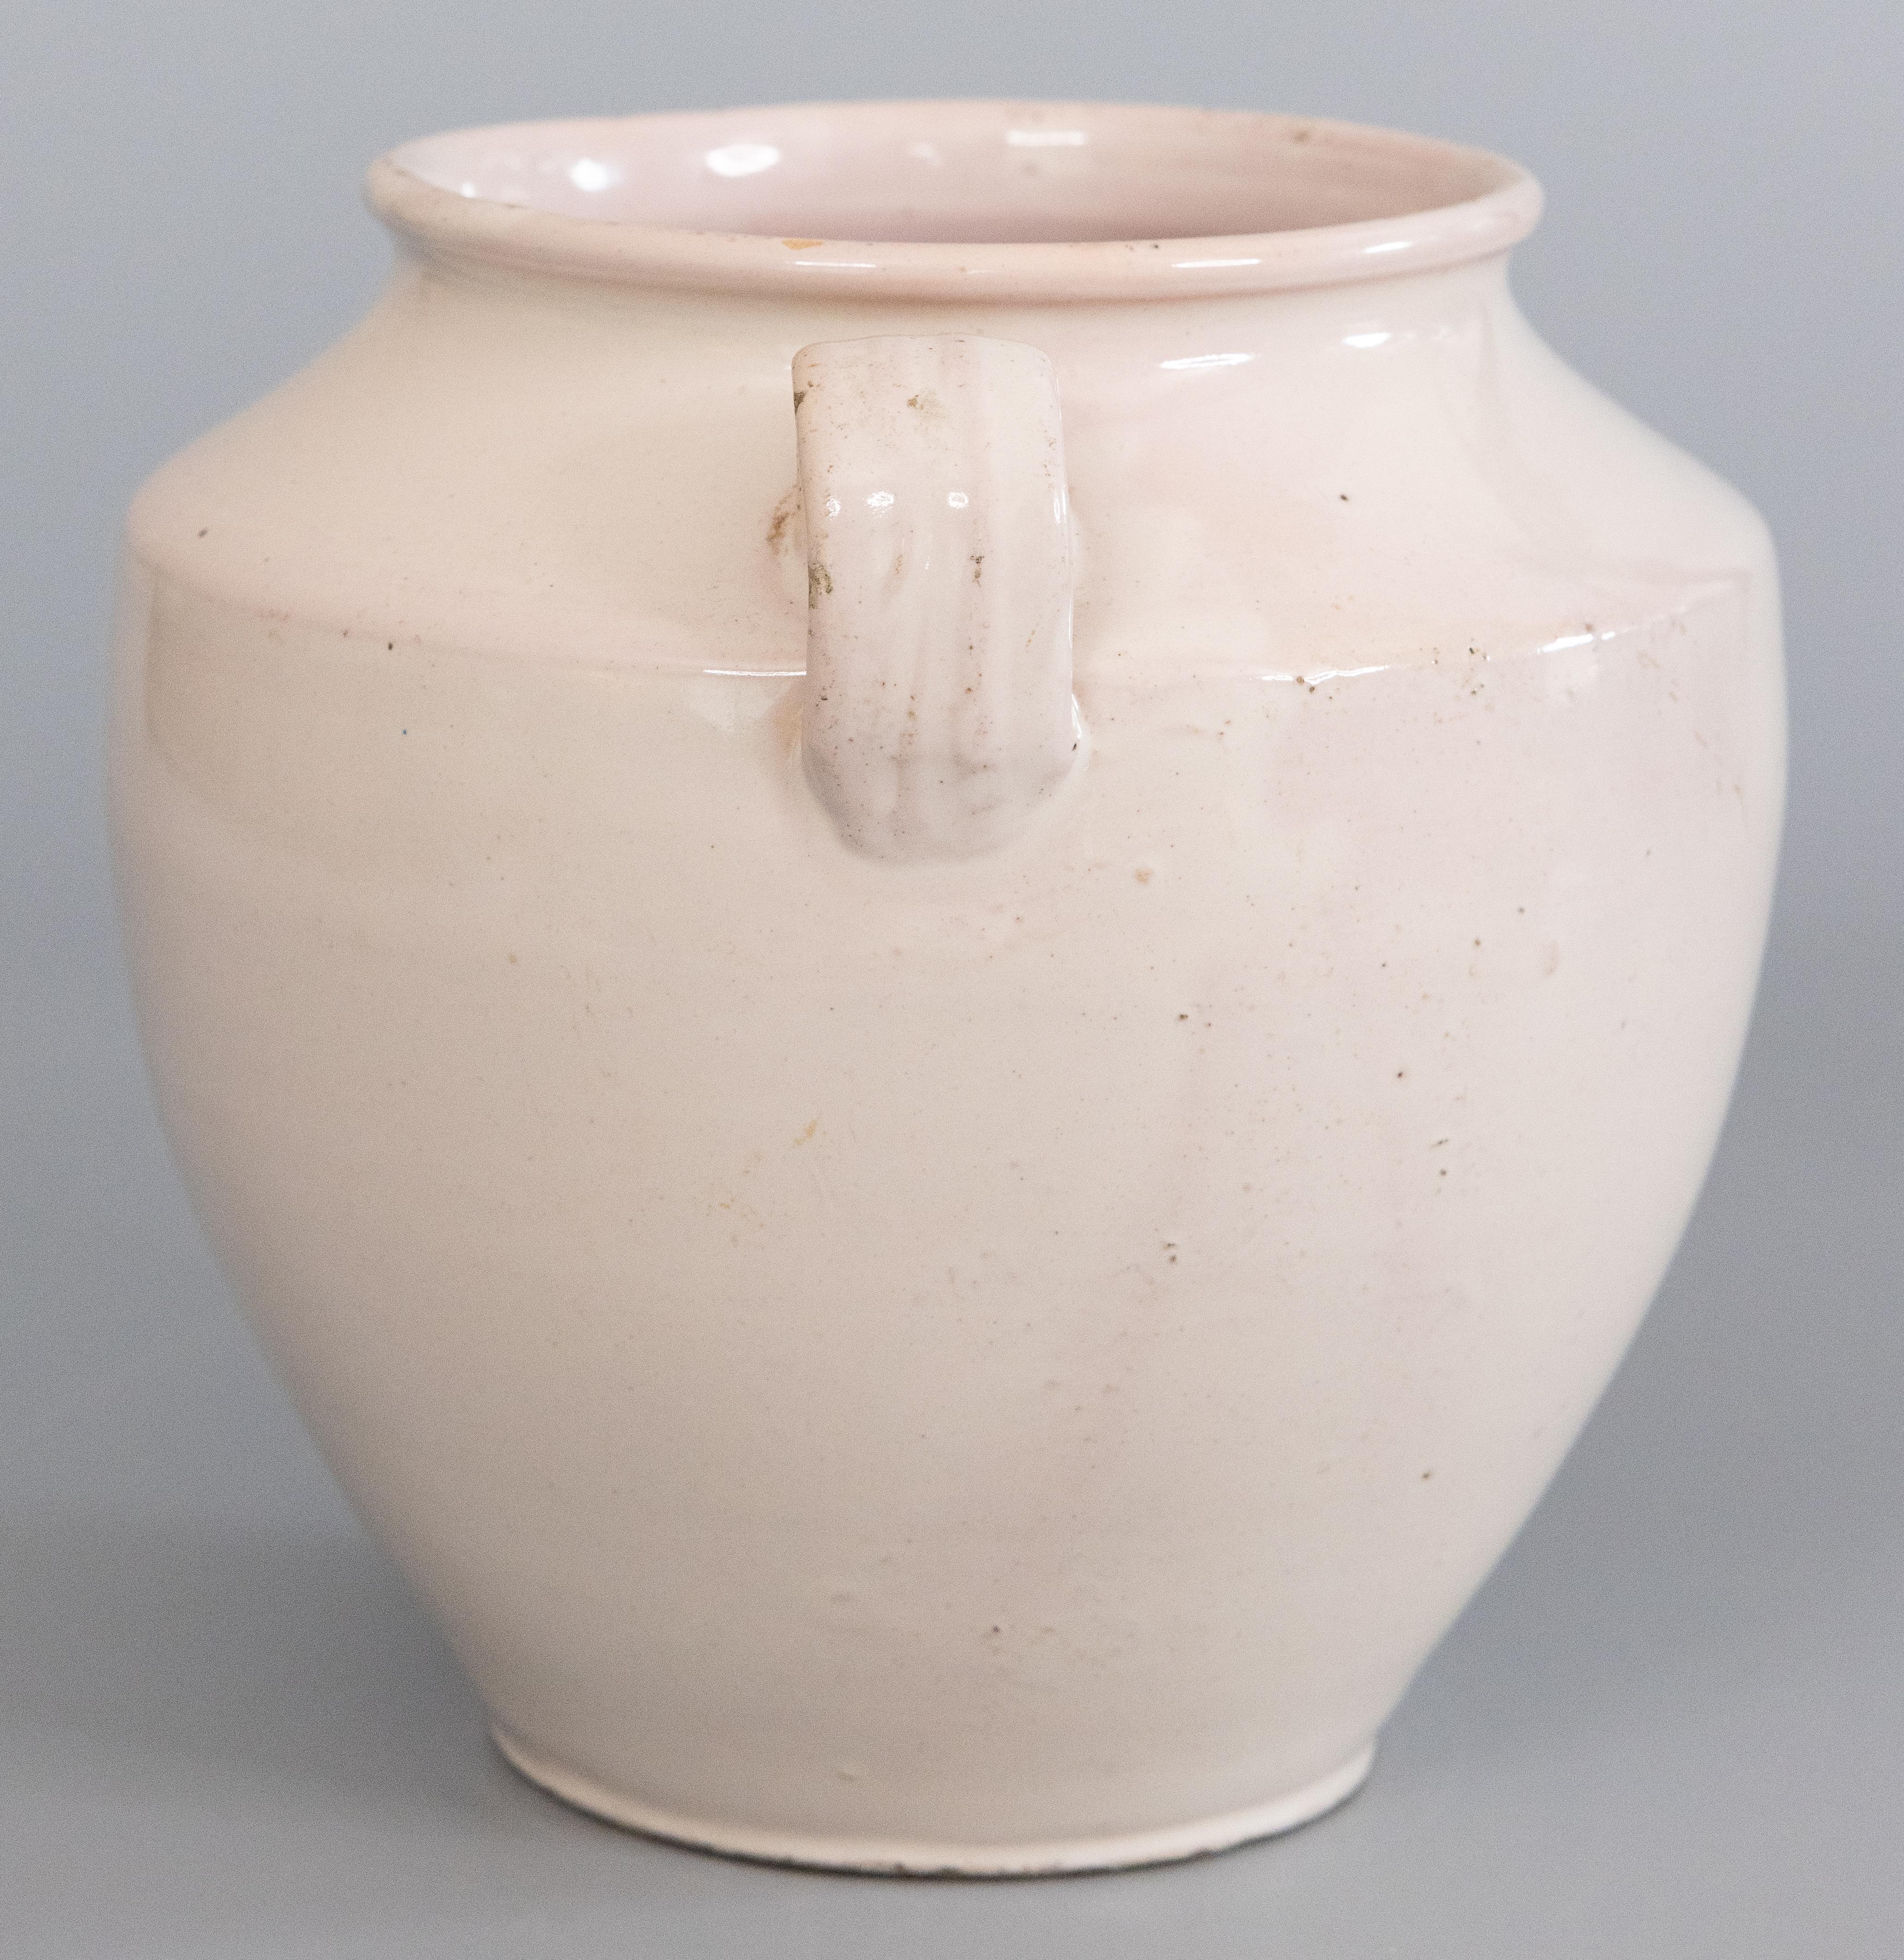 A lovely 19th-century French white glazed confit pot or jar. This pot is full of character, hand thrown and glazed with two charming handles, known as 'ears'. It is a creamy white with pink undertones and subtle variations. These jars were used for